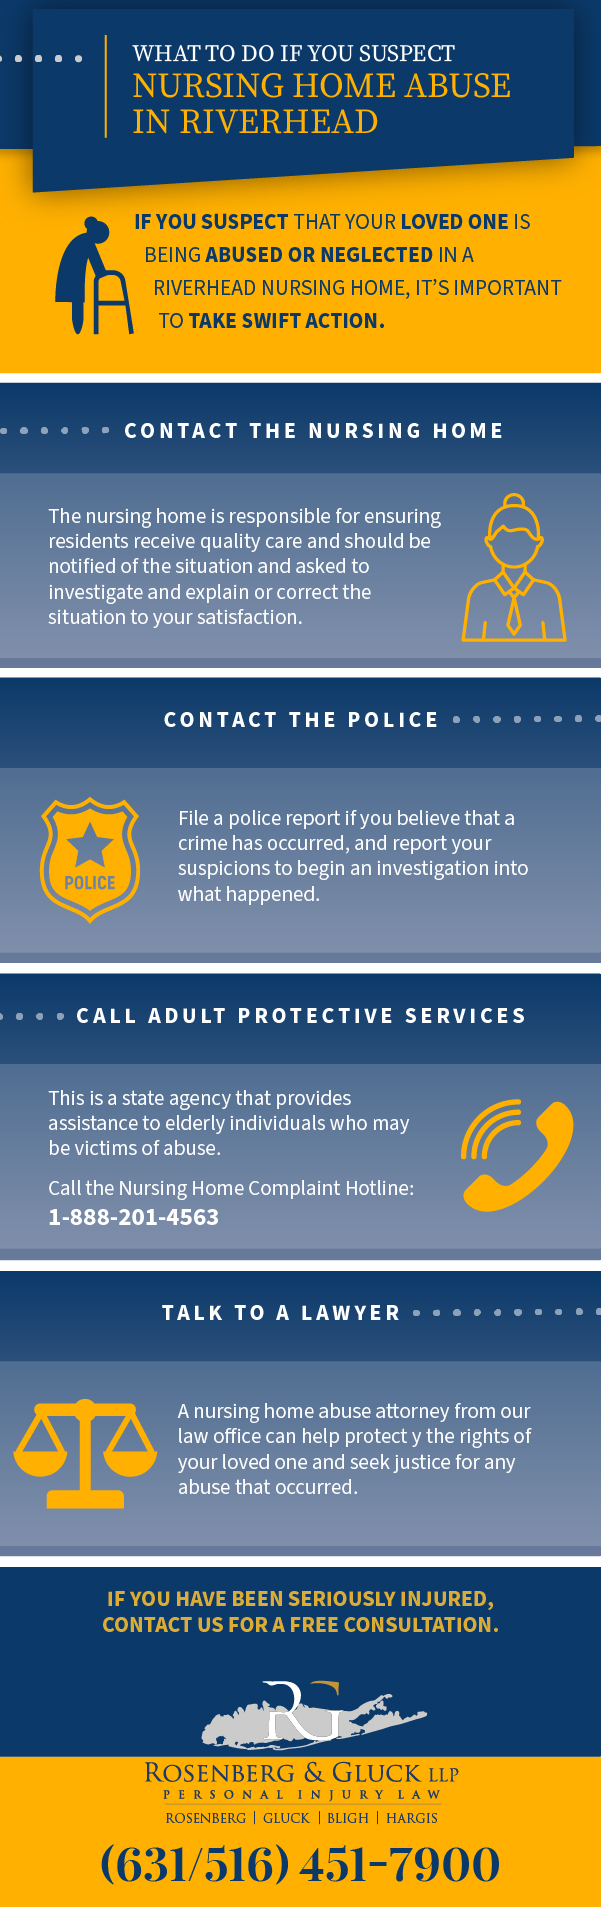 What to Do If You Suspect Nursing Home Abuse in Riverhead Infographic